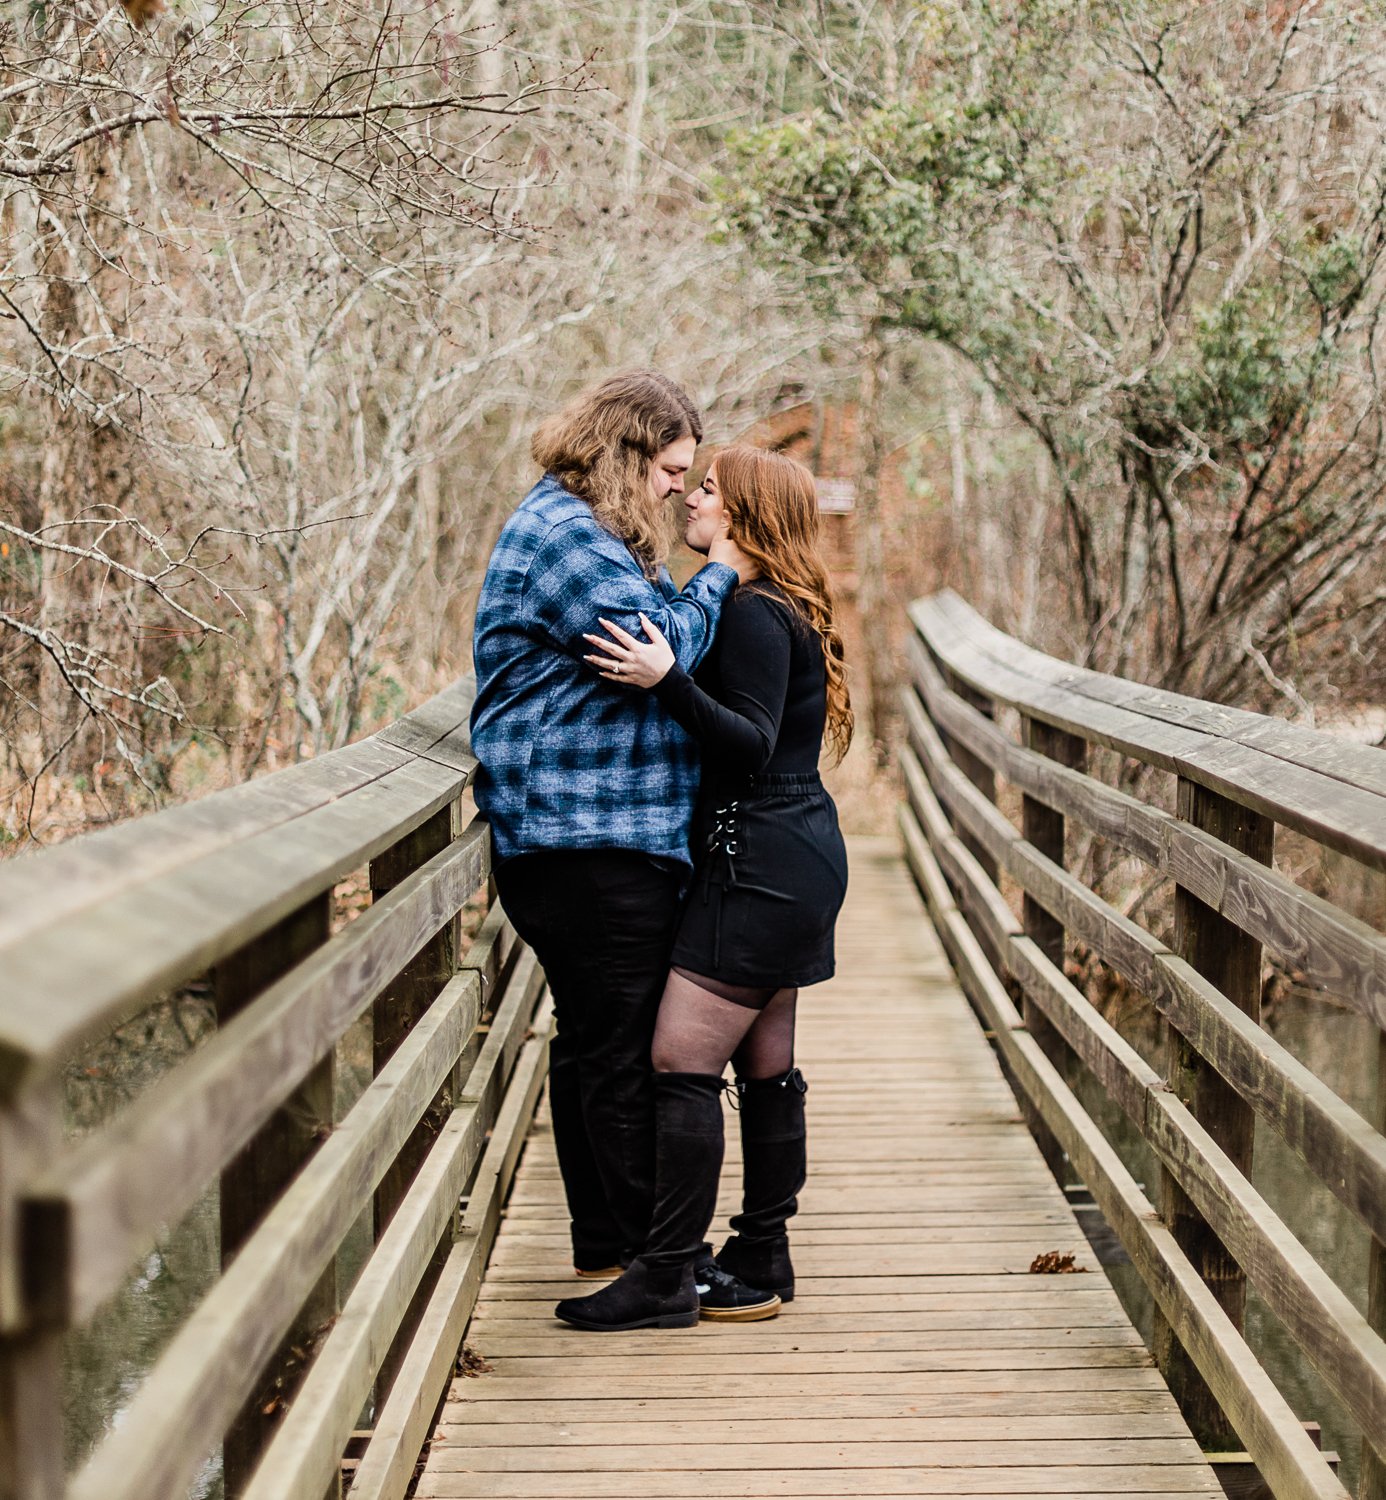 5 of the best places to take engagment photos in greenville sc-4.jpg